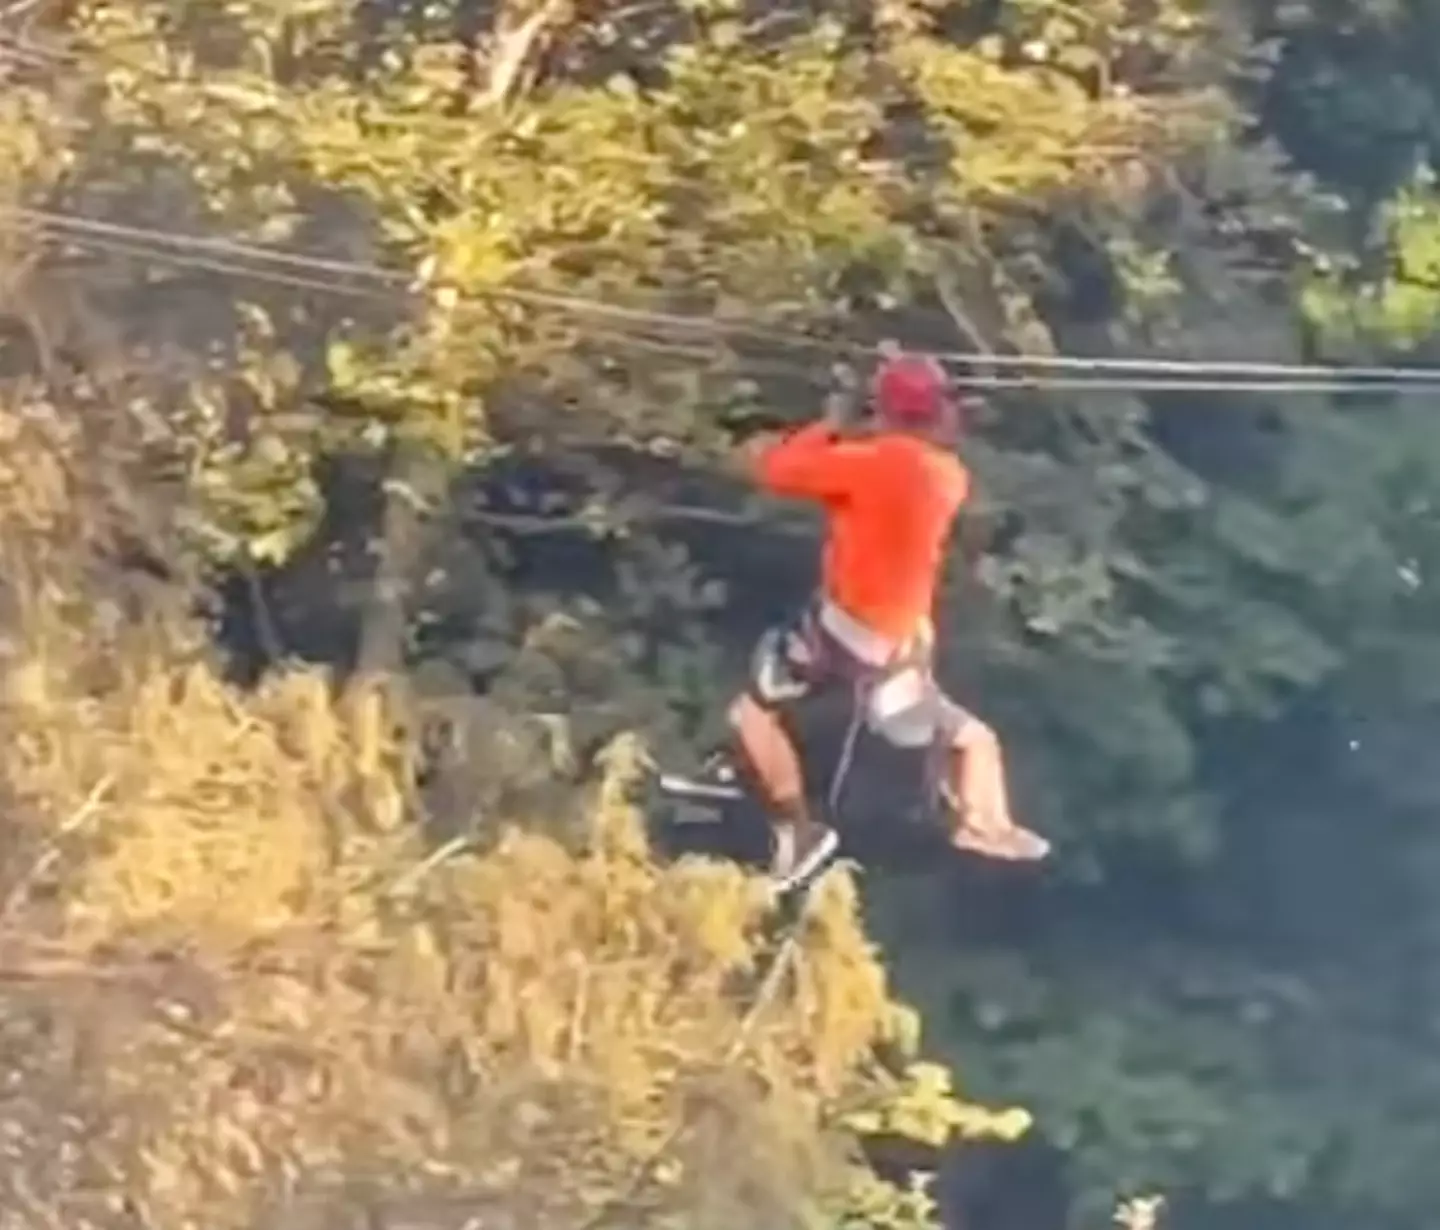 Cesar and another man were on the zipline in Mexico.